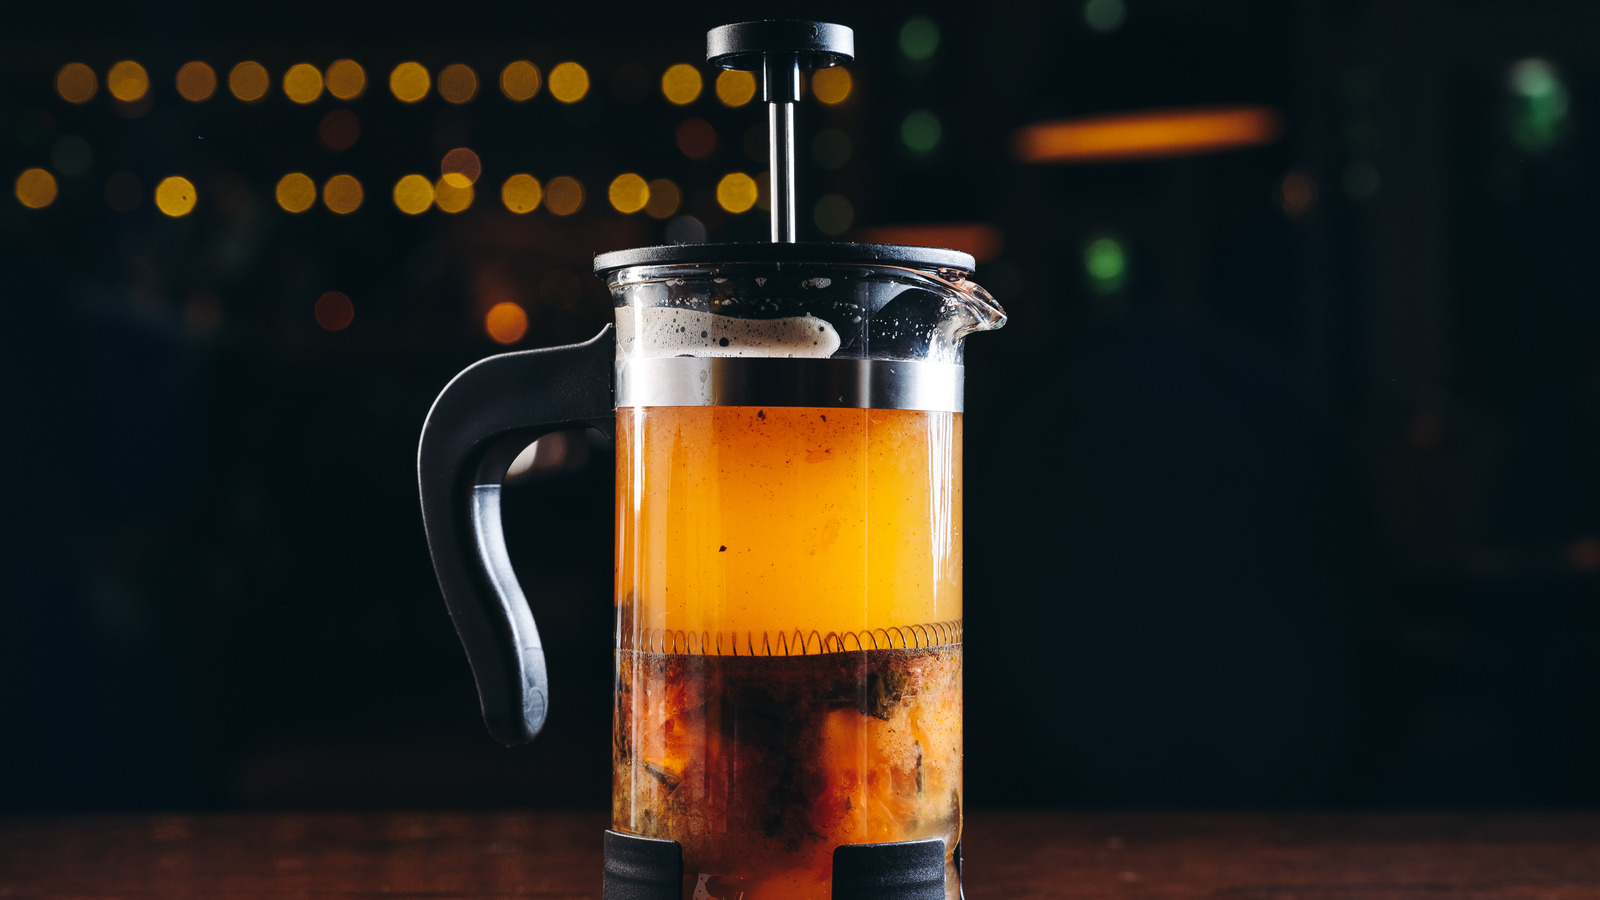 https://www.foodrepublic.com/img/gallery/take-out-your-french-press-to-make-better-cocktails/l-intro-1690224705.jpg